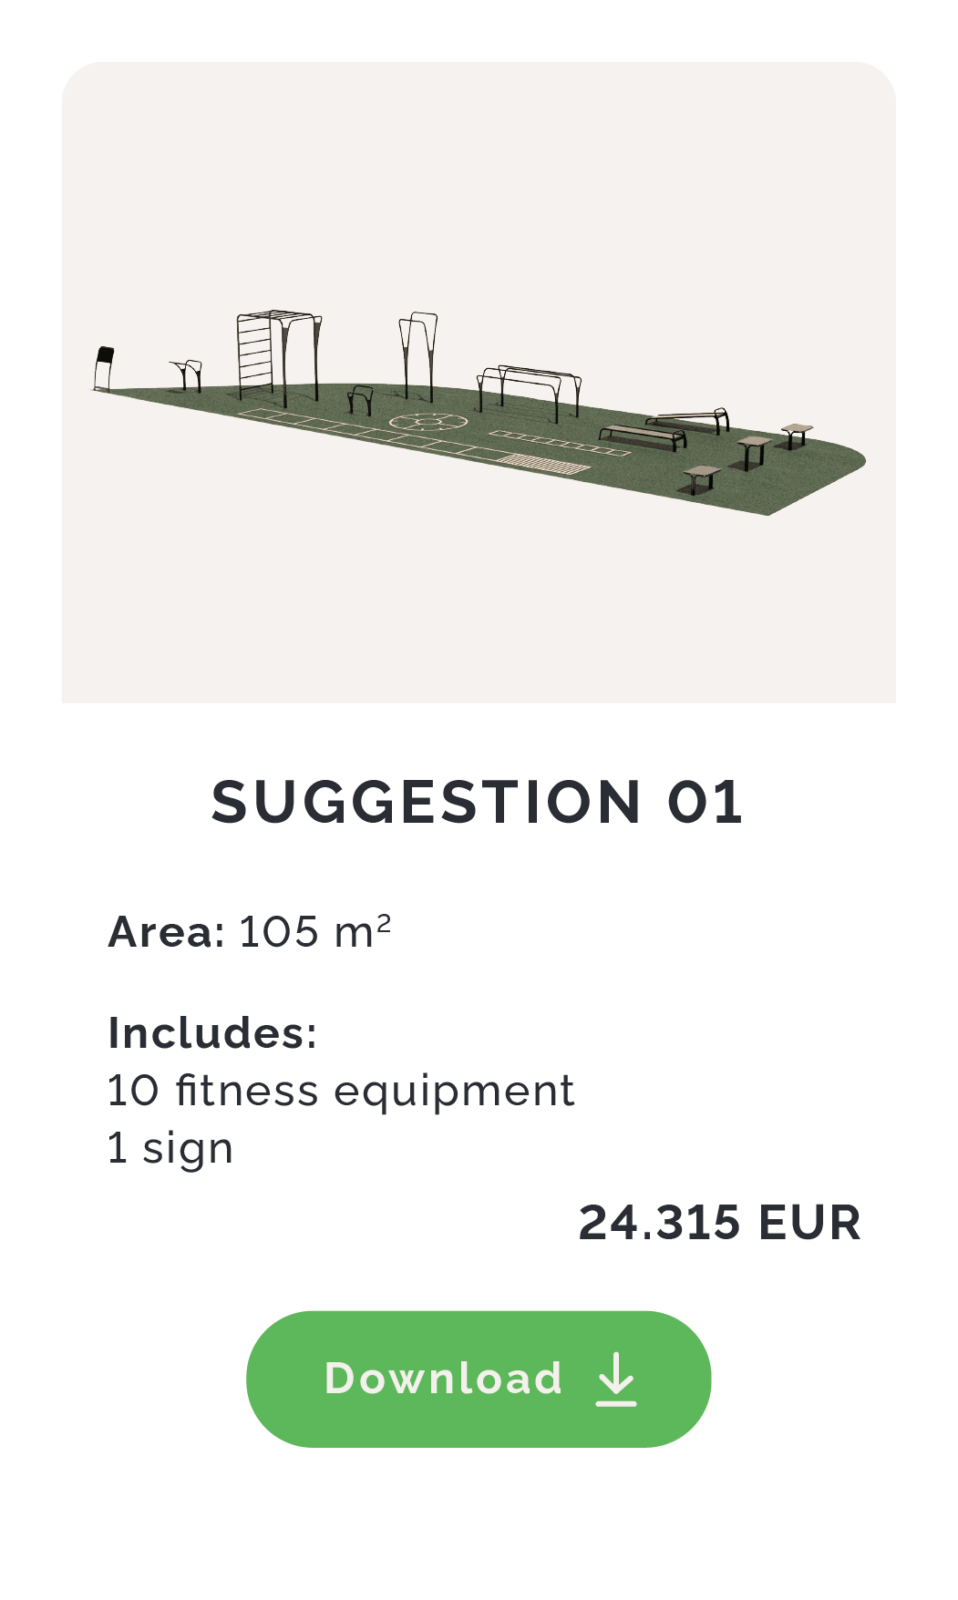 NOORD idea and suggesstion for outdoor activity area